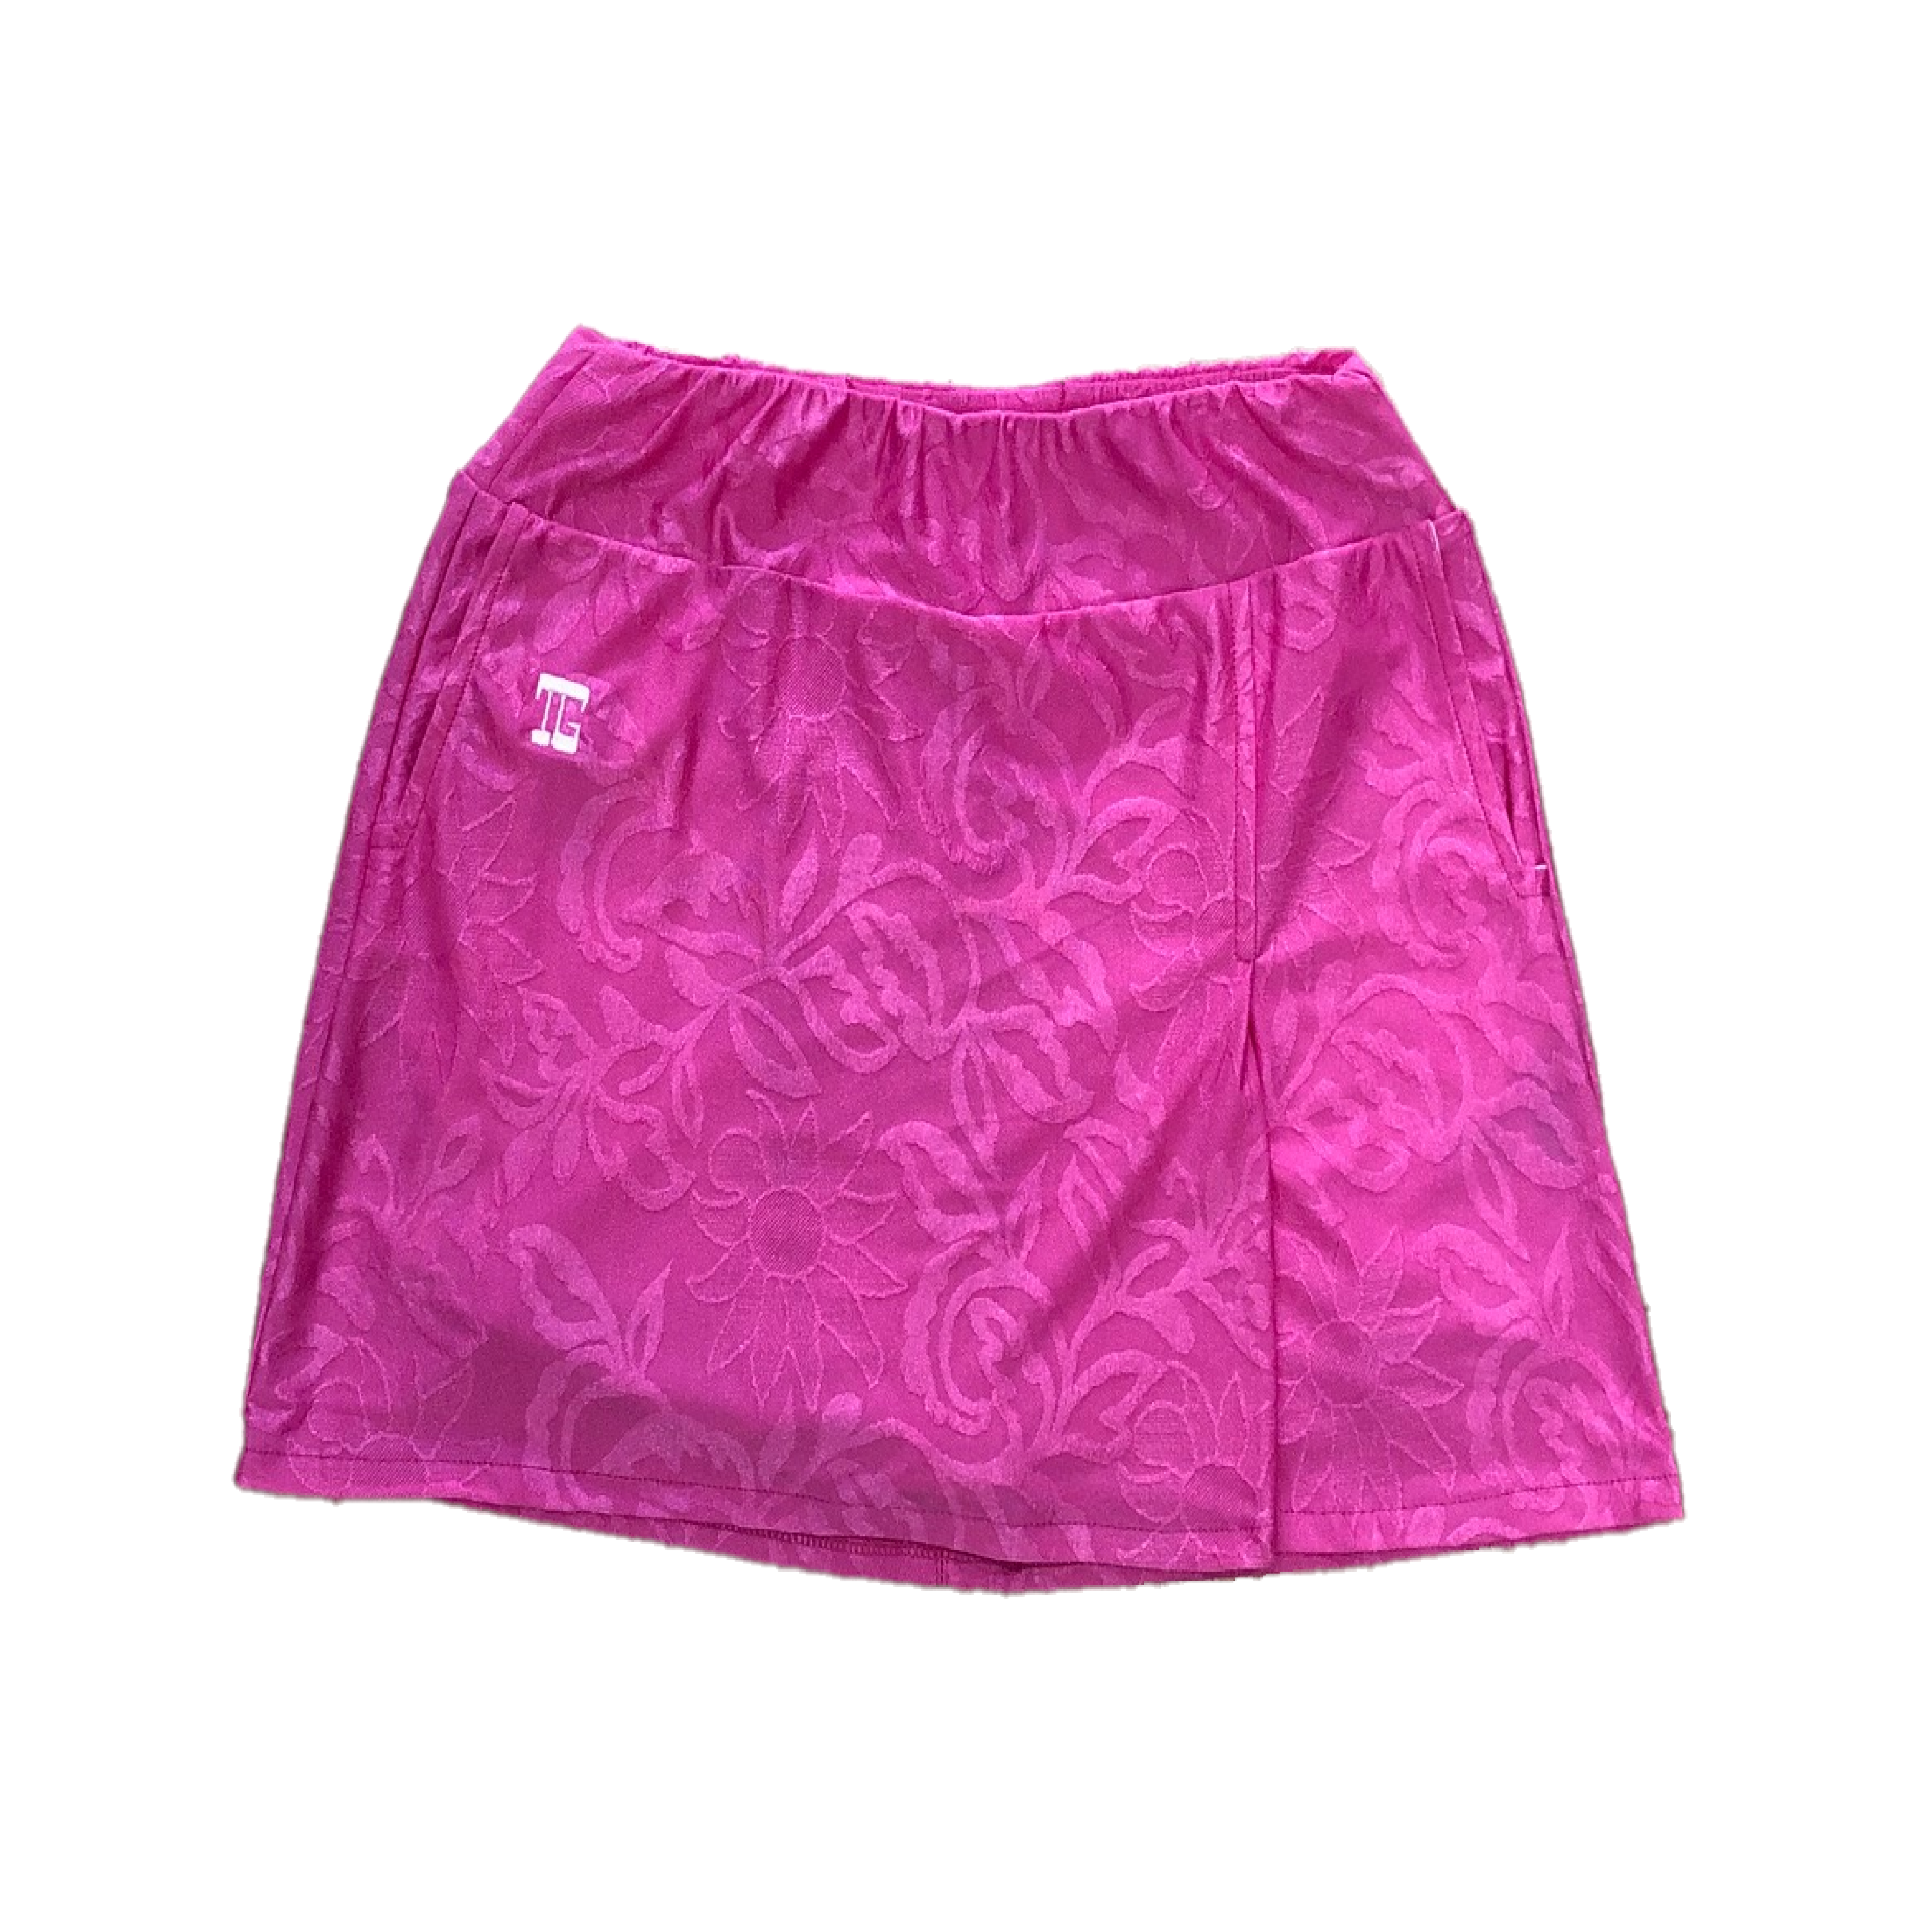 LS-066B || Skirt Bright Pink With Faith Silver Leaf Motif 2 Side And One Rear Pockets